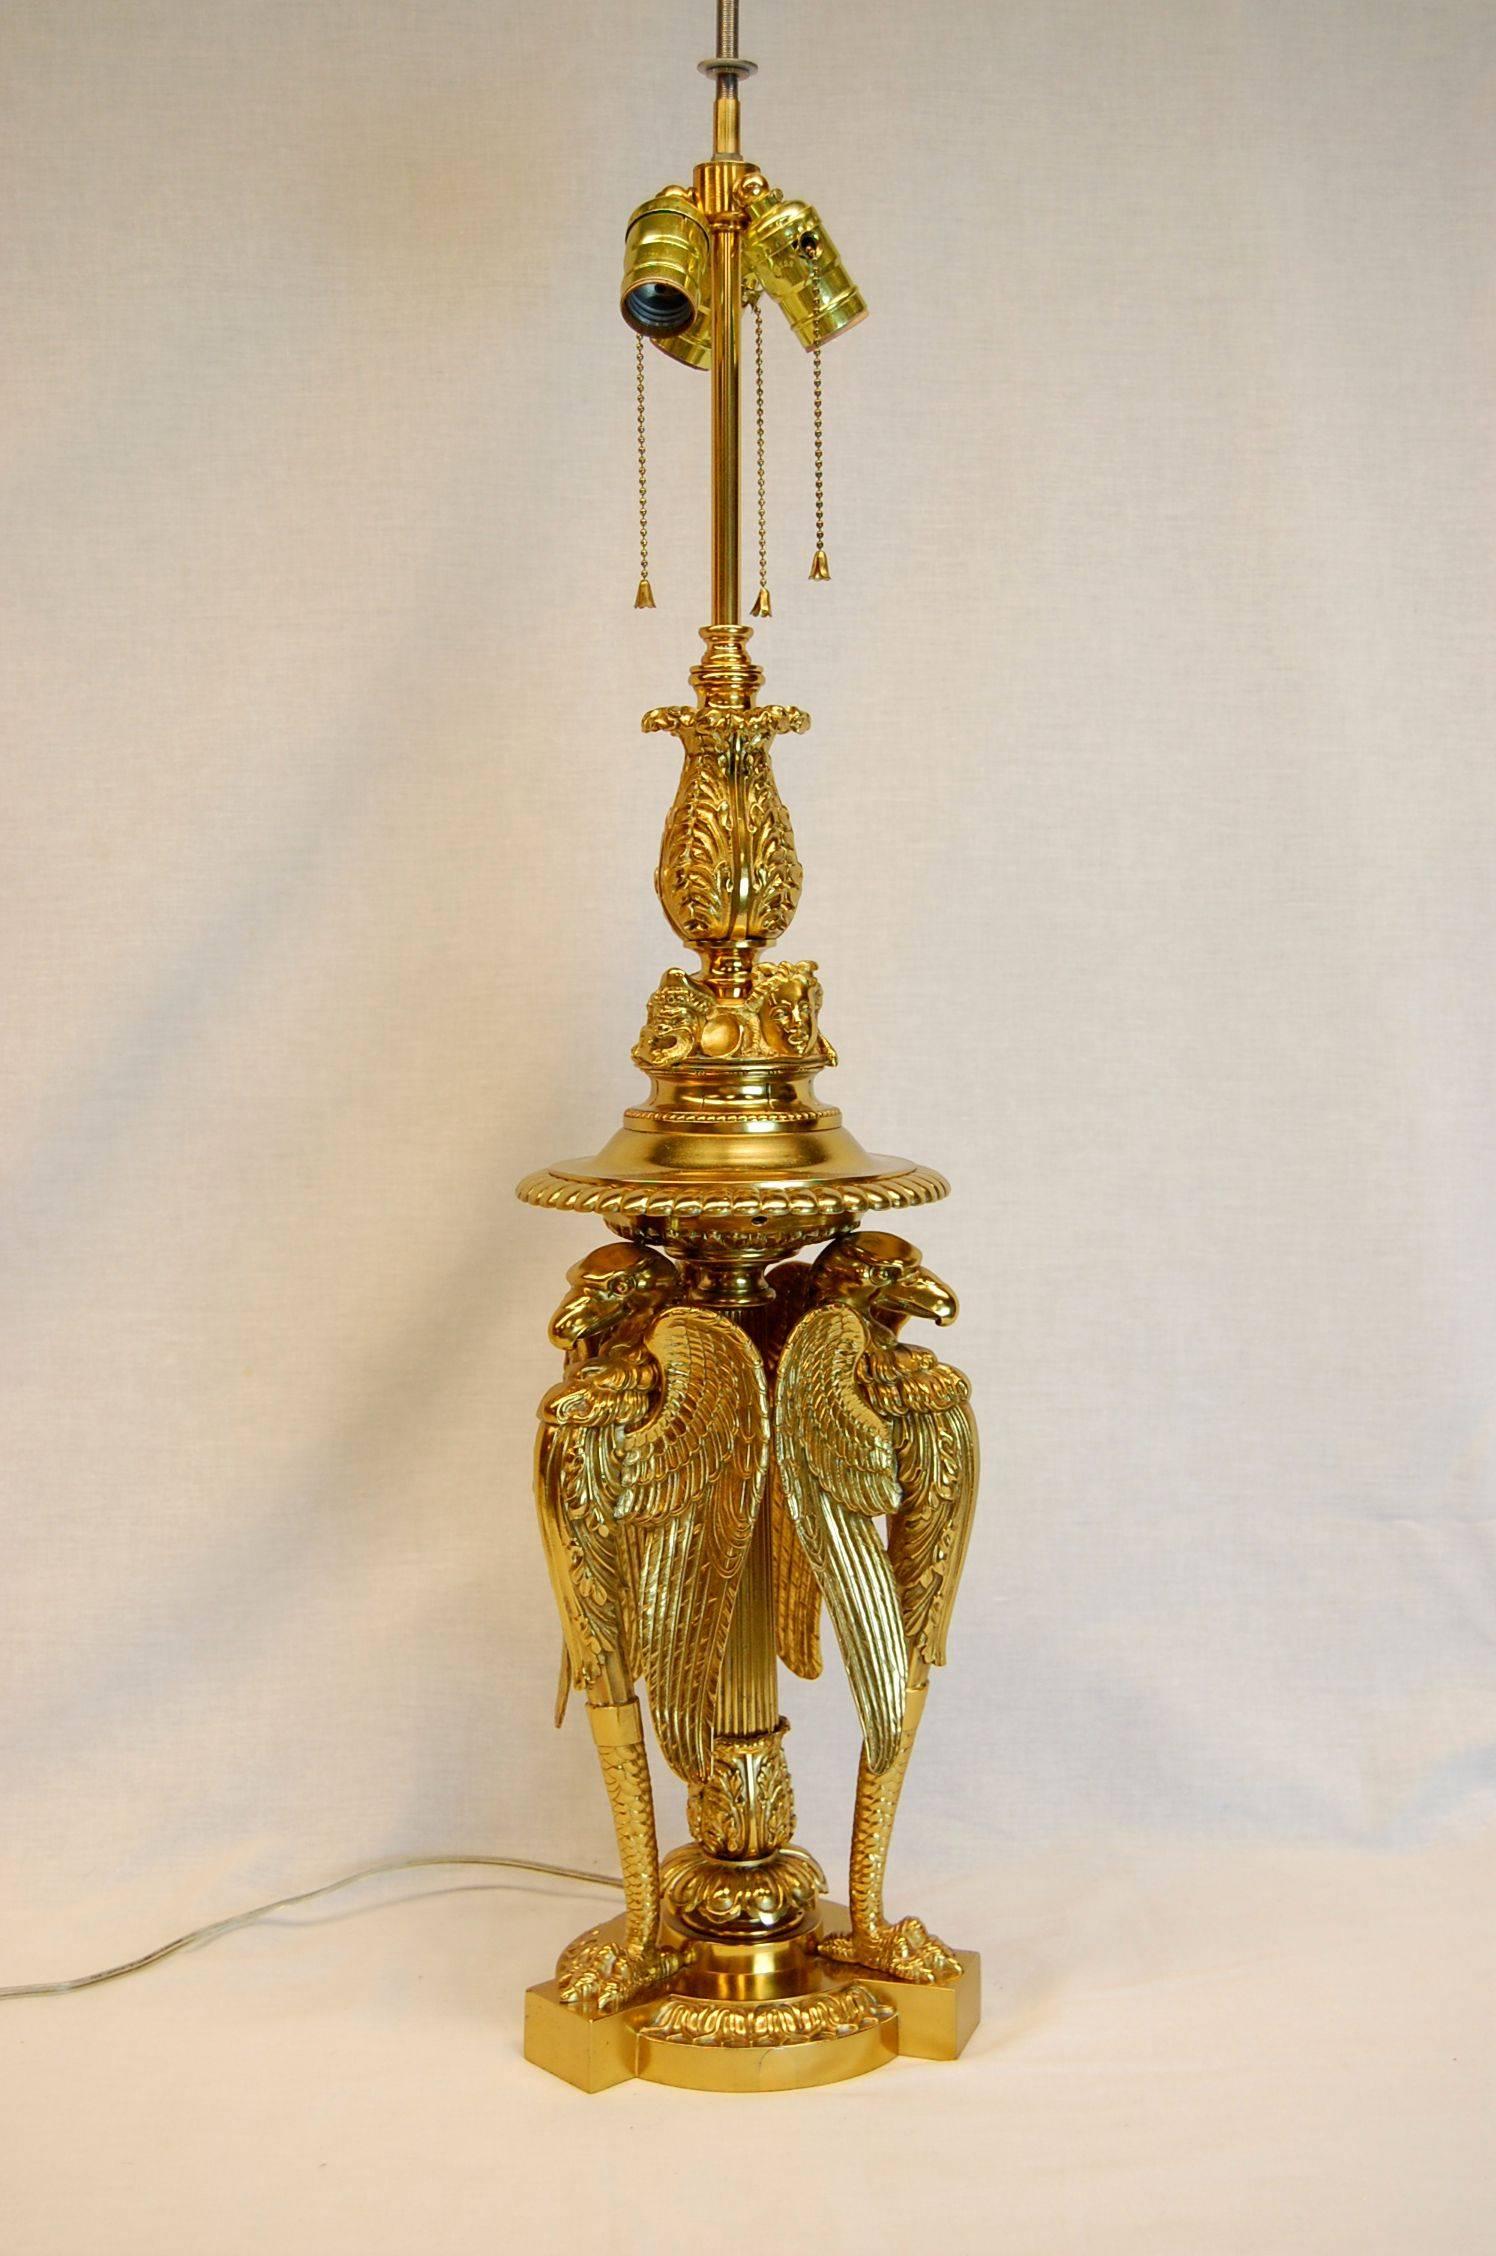 This exquisite lamp comes with the custom-made silk shade with custom tassel trim. Three fantastic Bald Eagles with wings partially spread surmount the center column.